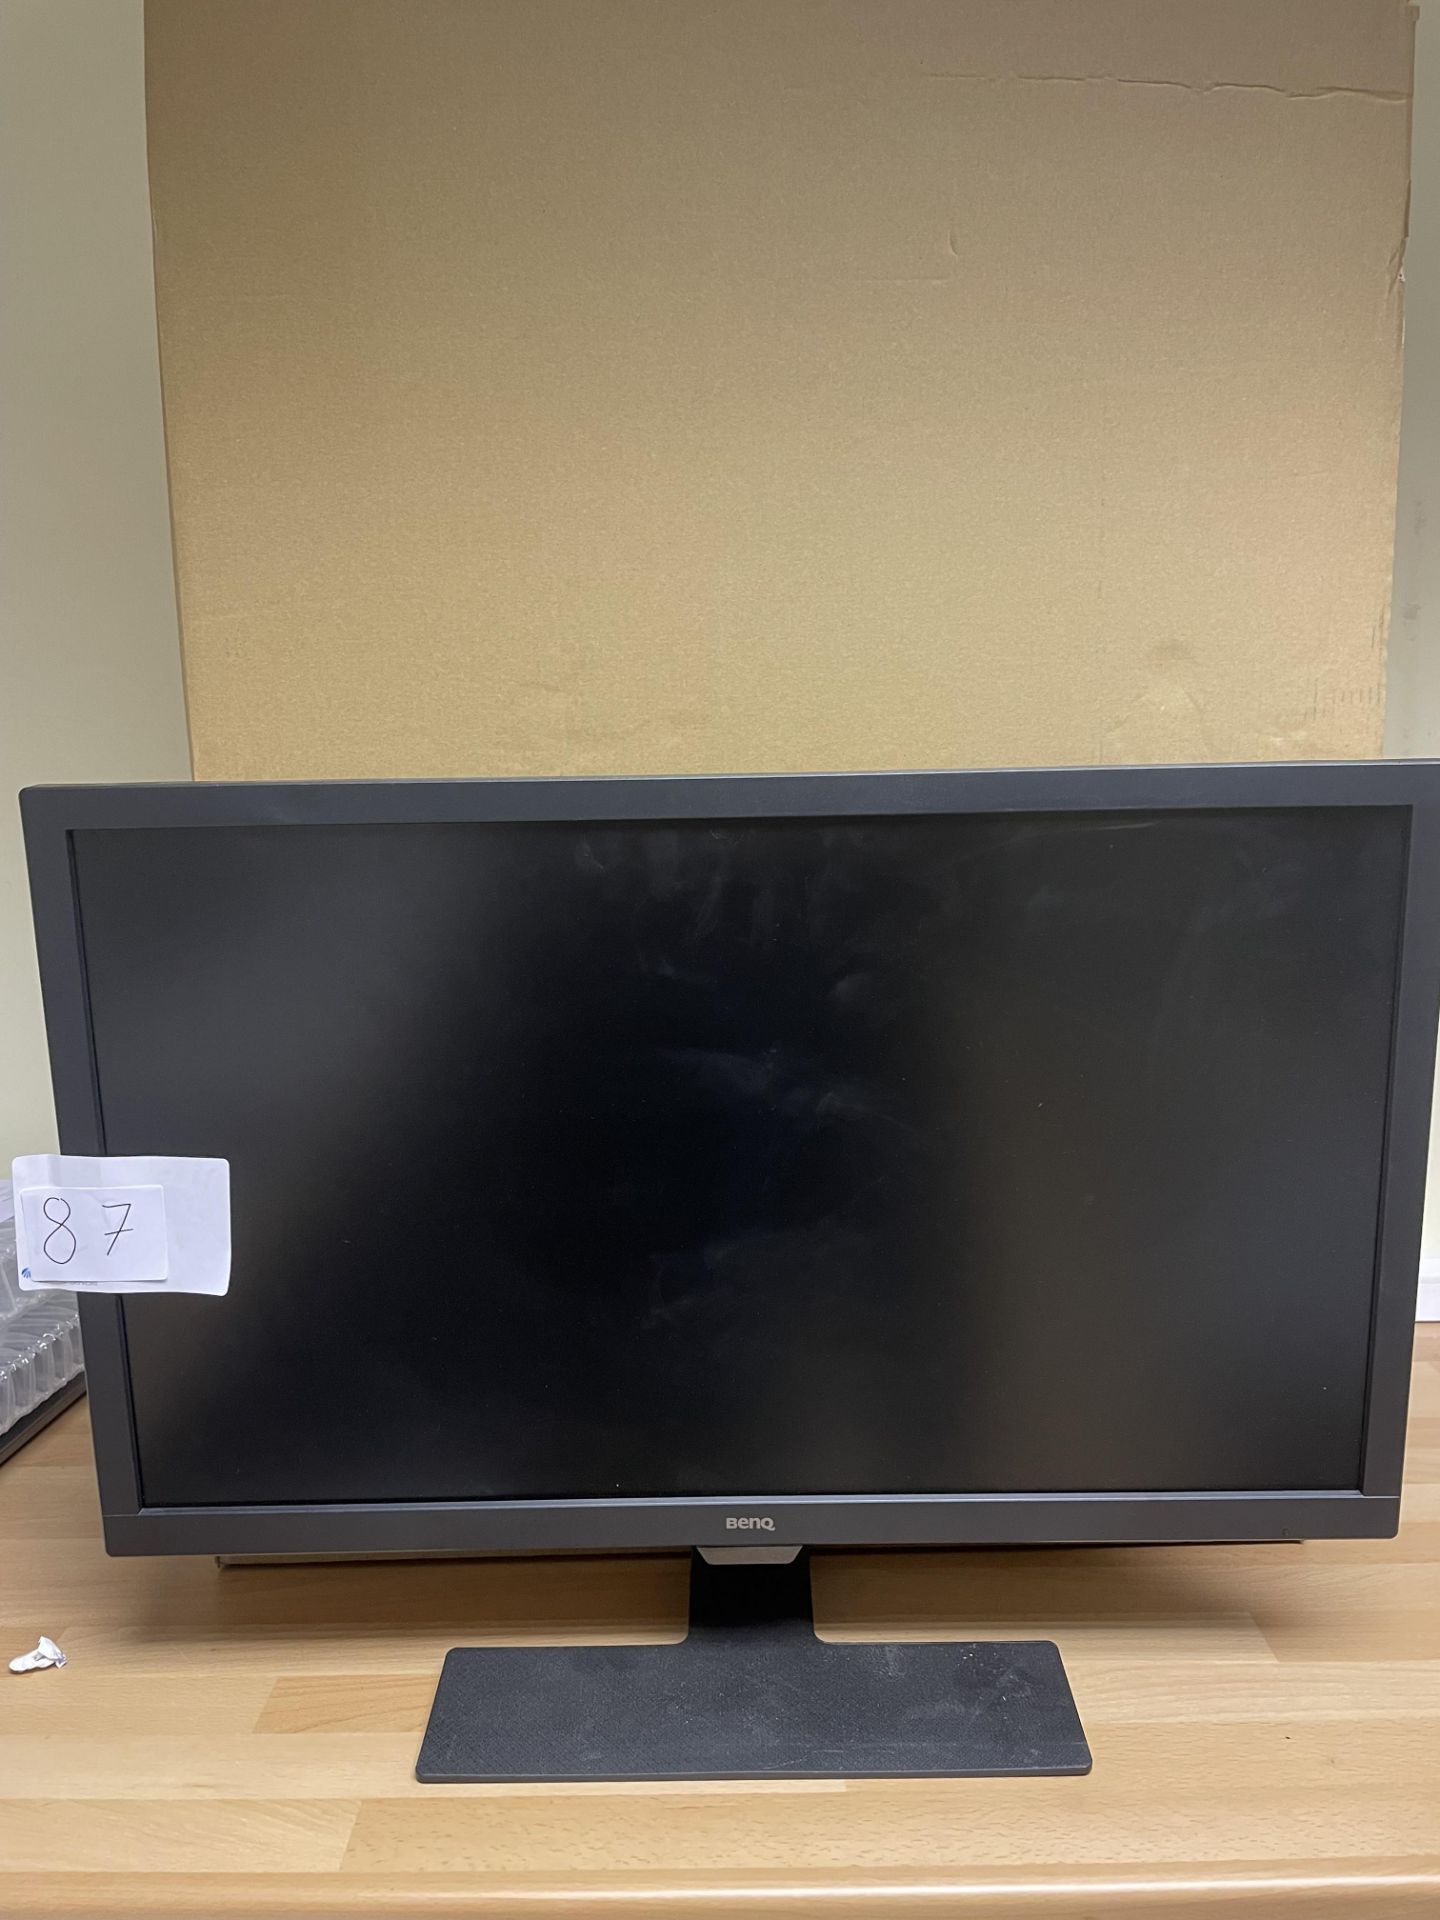 Benq, GL2780-B Monitor, No box or plugs, comes with stand, slight cosmetic wear, Serial Number ETD7